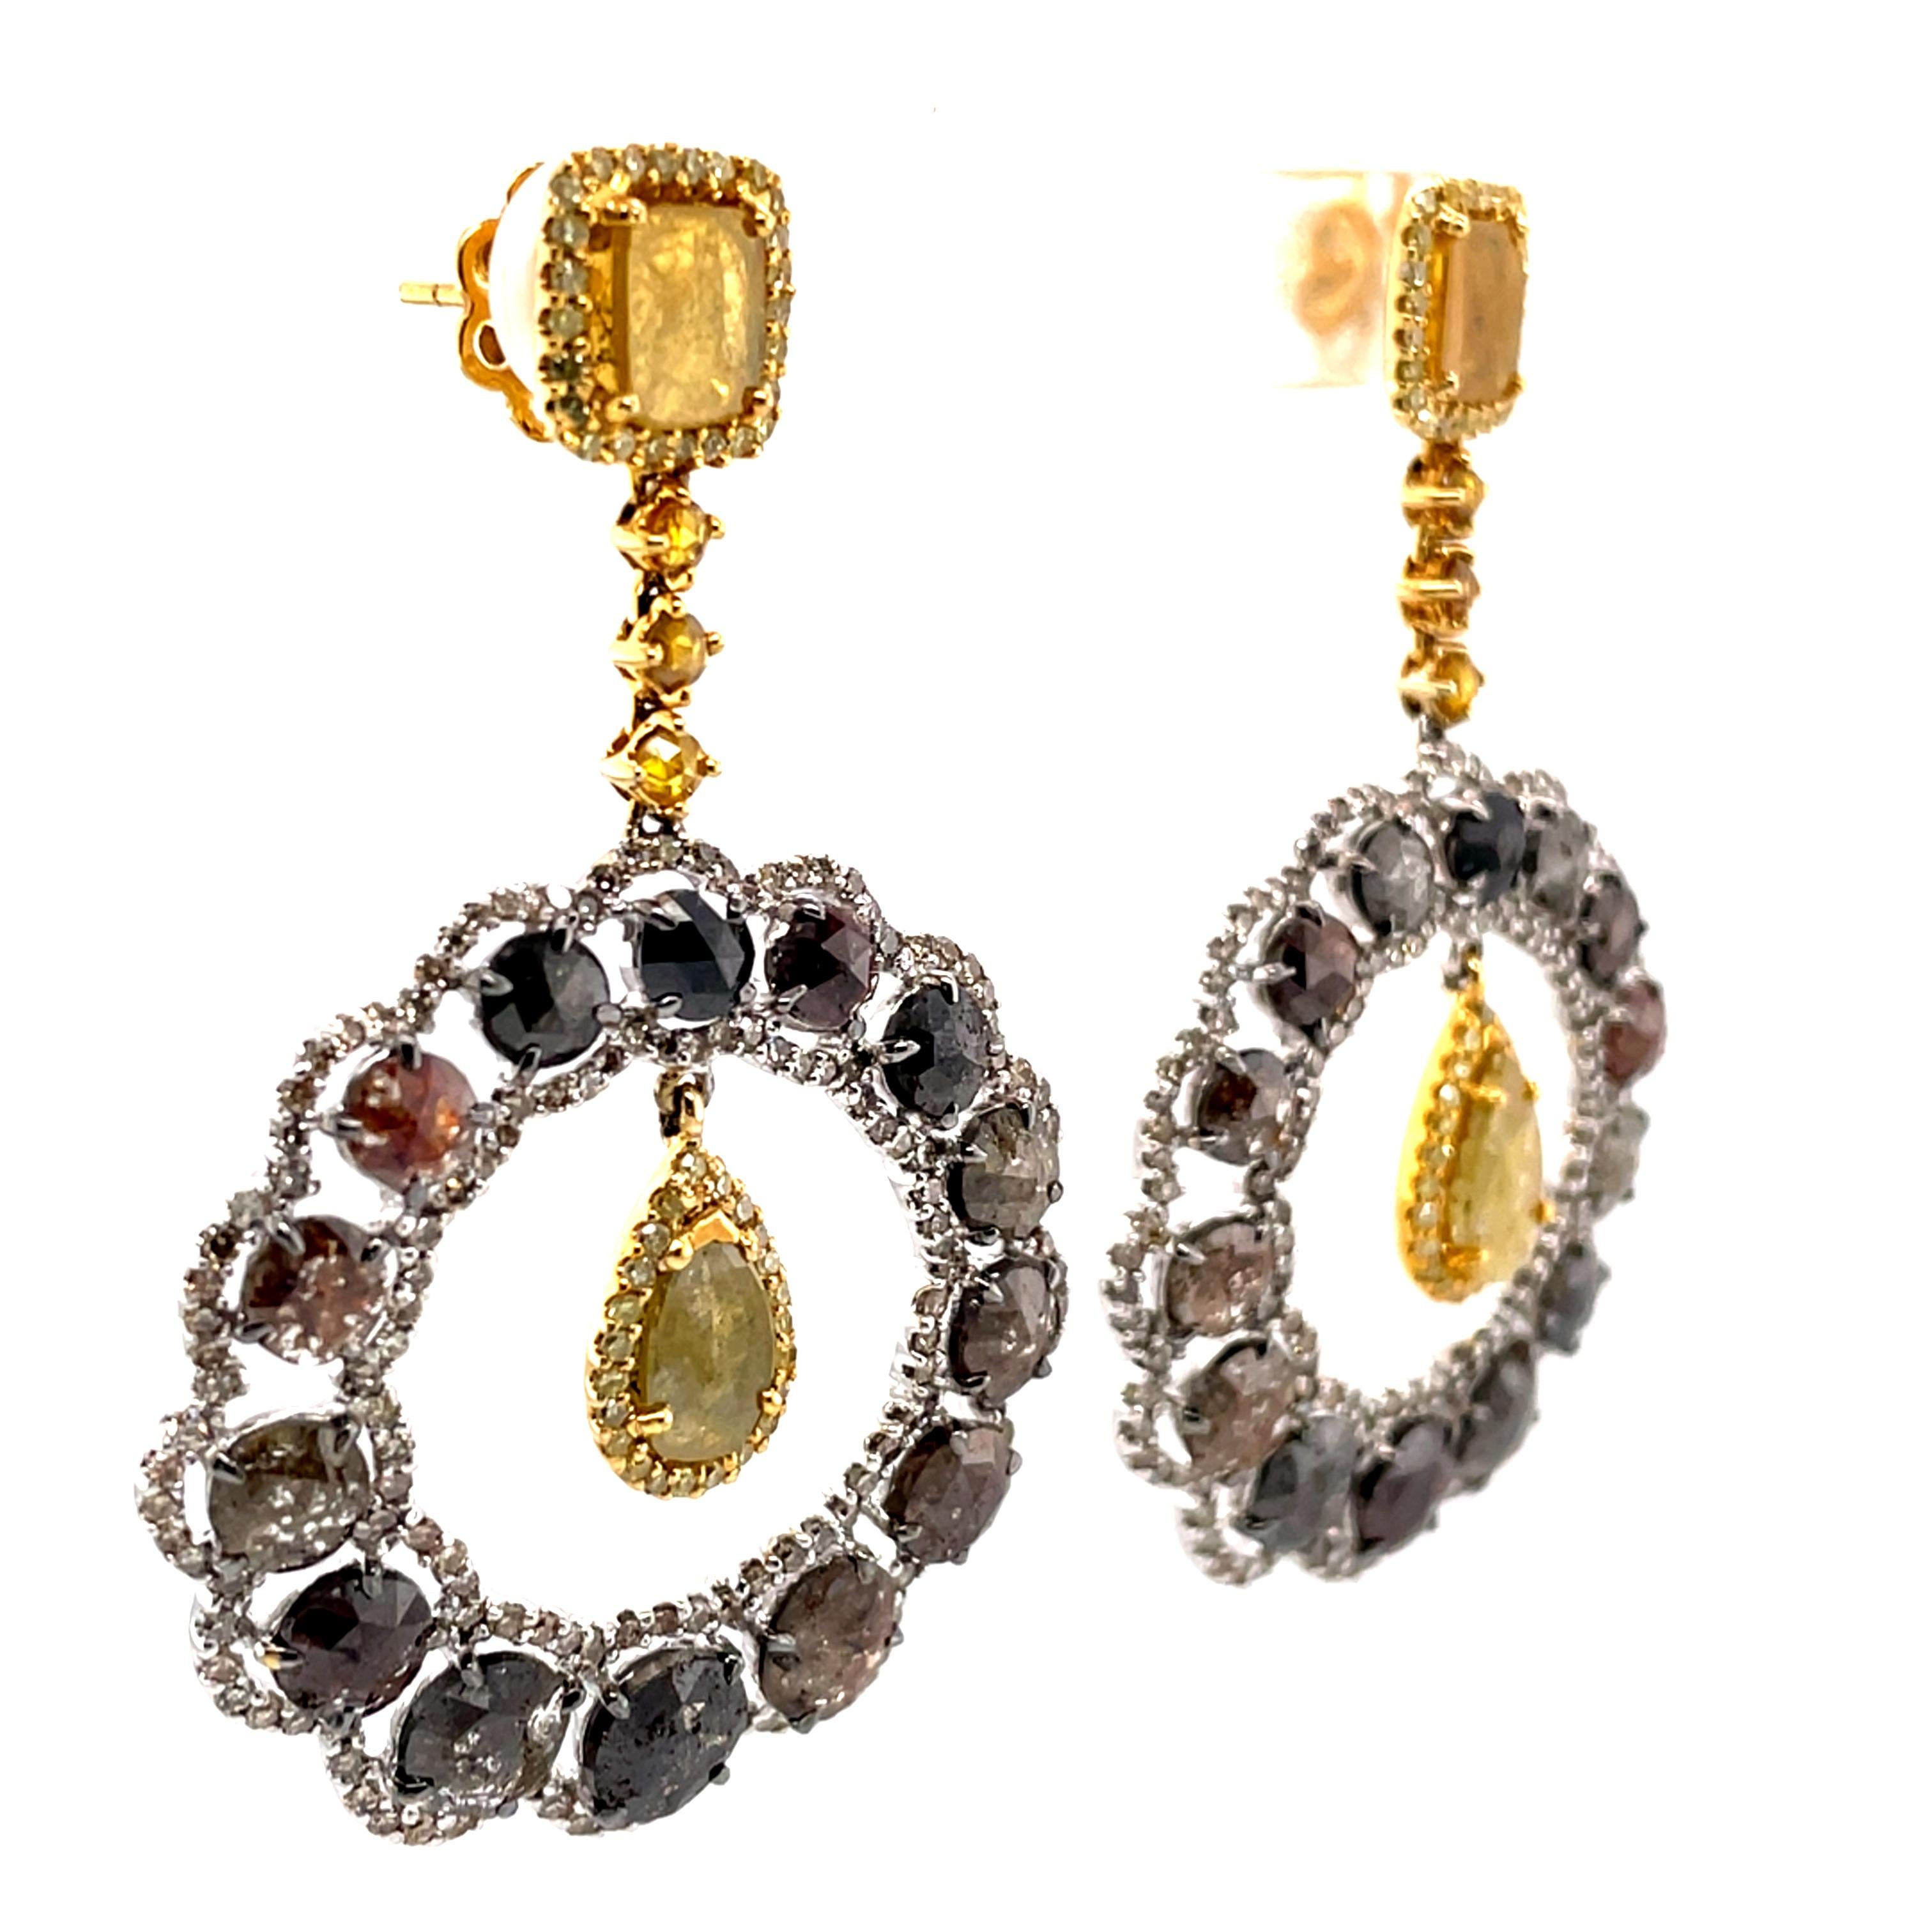 A beautiful pair of 14Kt yellow and white gold chandelier earrings featuring 1.73 carats of yellow fancy shaped rose cut diamonds, 7.30 carats of fancy brown round rose cut diamonds and 2.40 carats of round brilliant cut diamonds. Some of the fancy